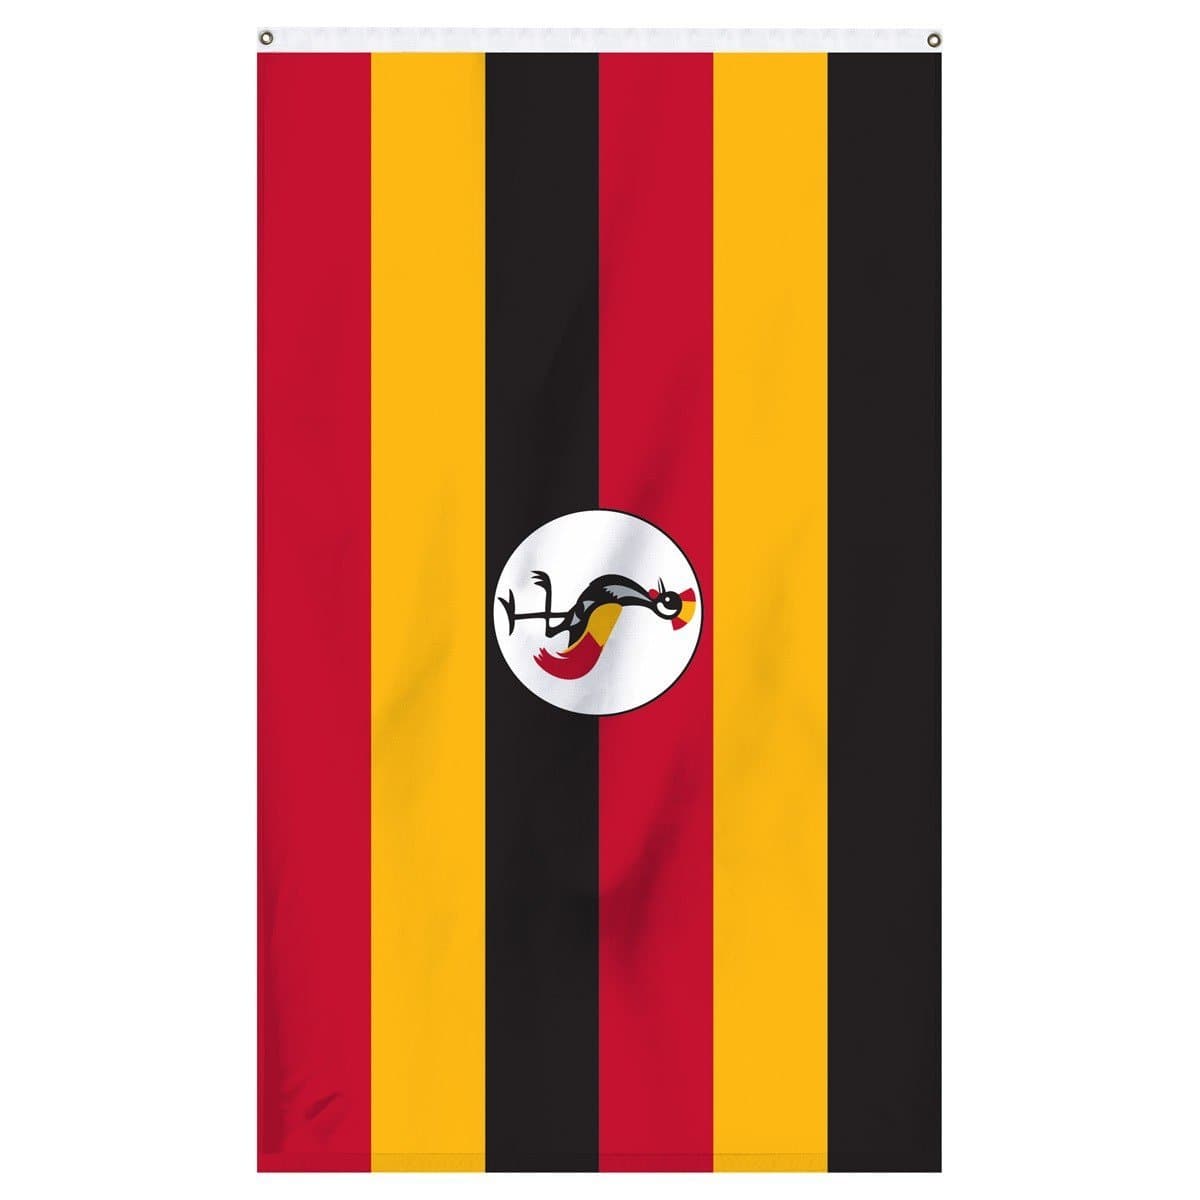 Uganda National Flag for sale to buy online from Atlantic Flagpole. Black, yellow, and red flag with a cute rooster in the center.